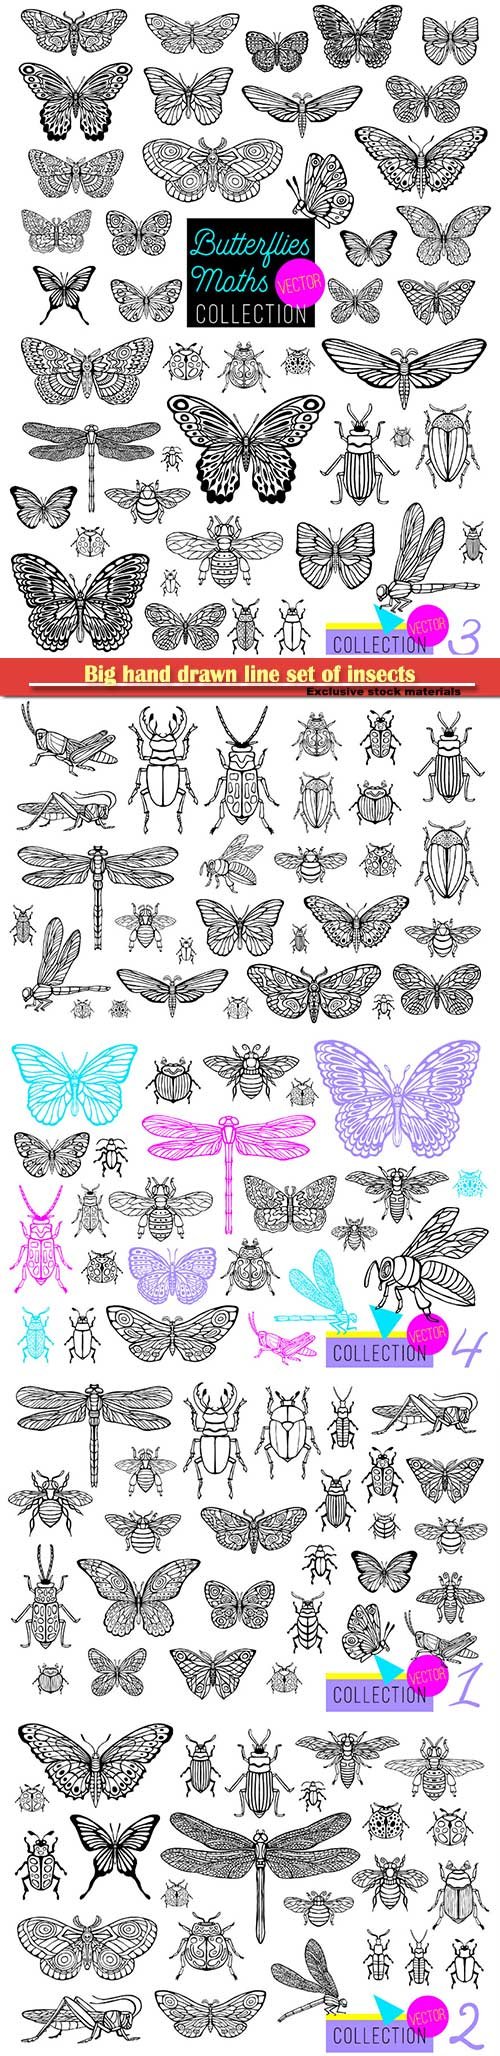 Big hand drawn line set of insects, beetles, honey bees, butterfly moth, bumblebee, wasp, dragonfly, grasshopper